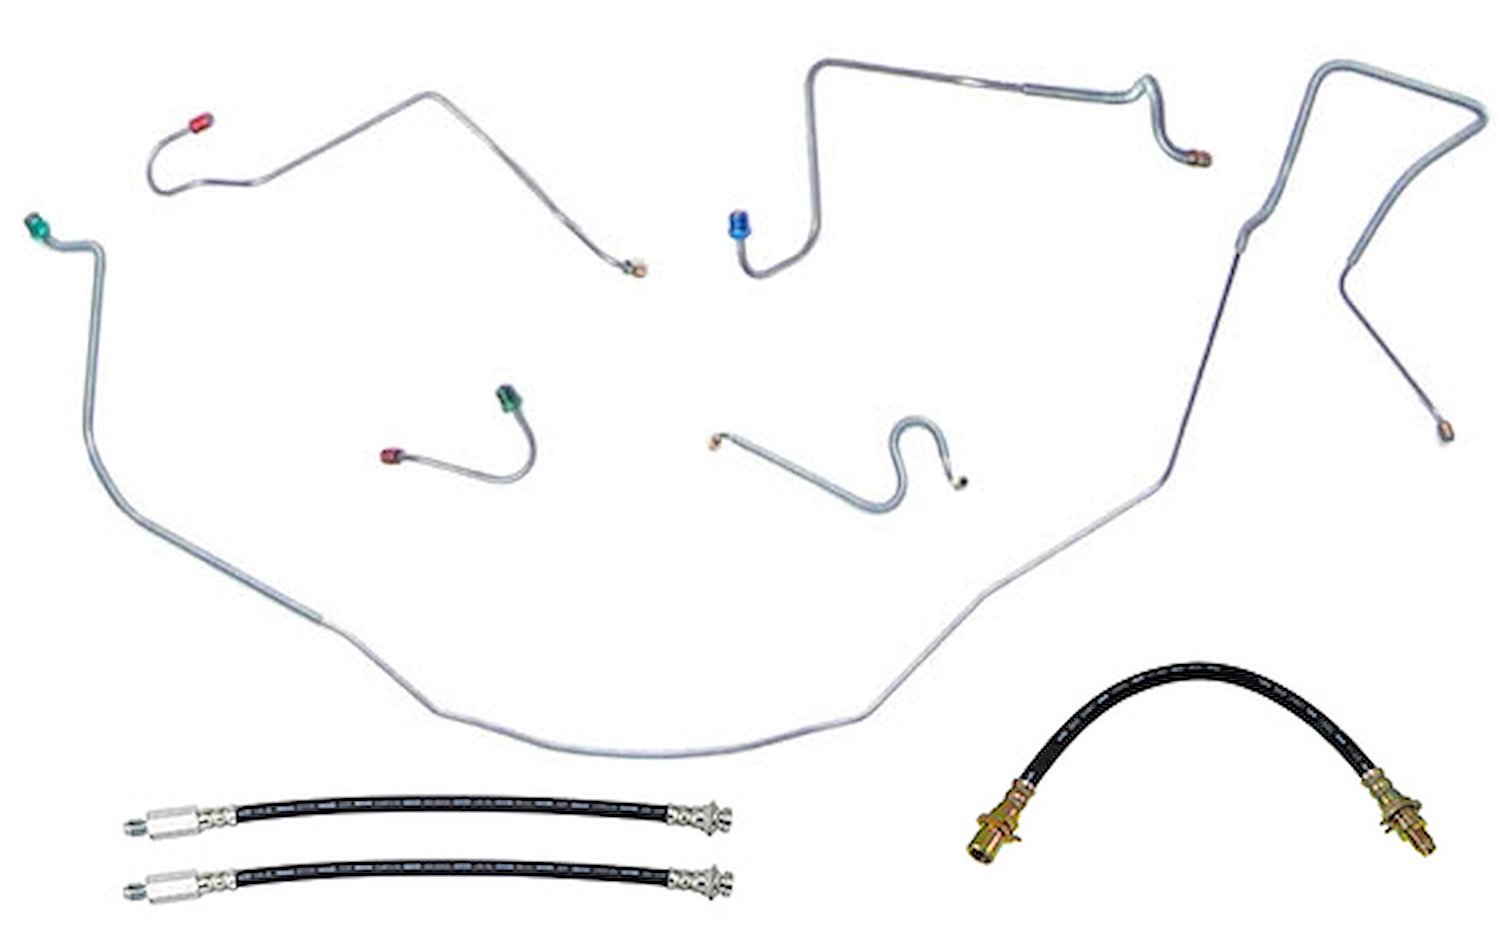 Complete Brake Line & Hose Kit for 1967 Chevy Chevelle, Malibu SS Hardtop w/Manual Disc Brakes [Stainless Steel]